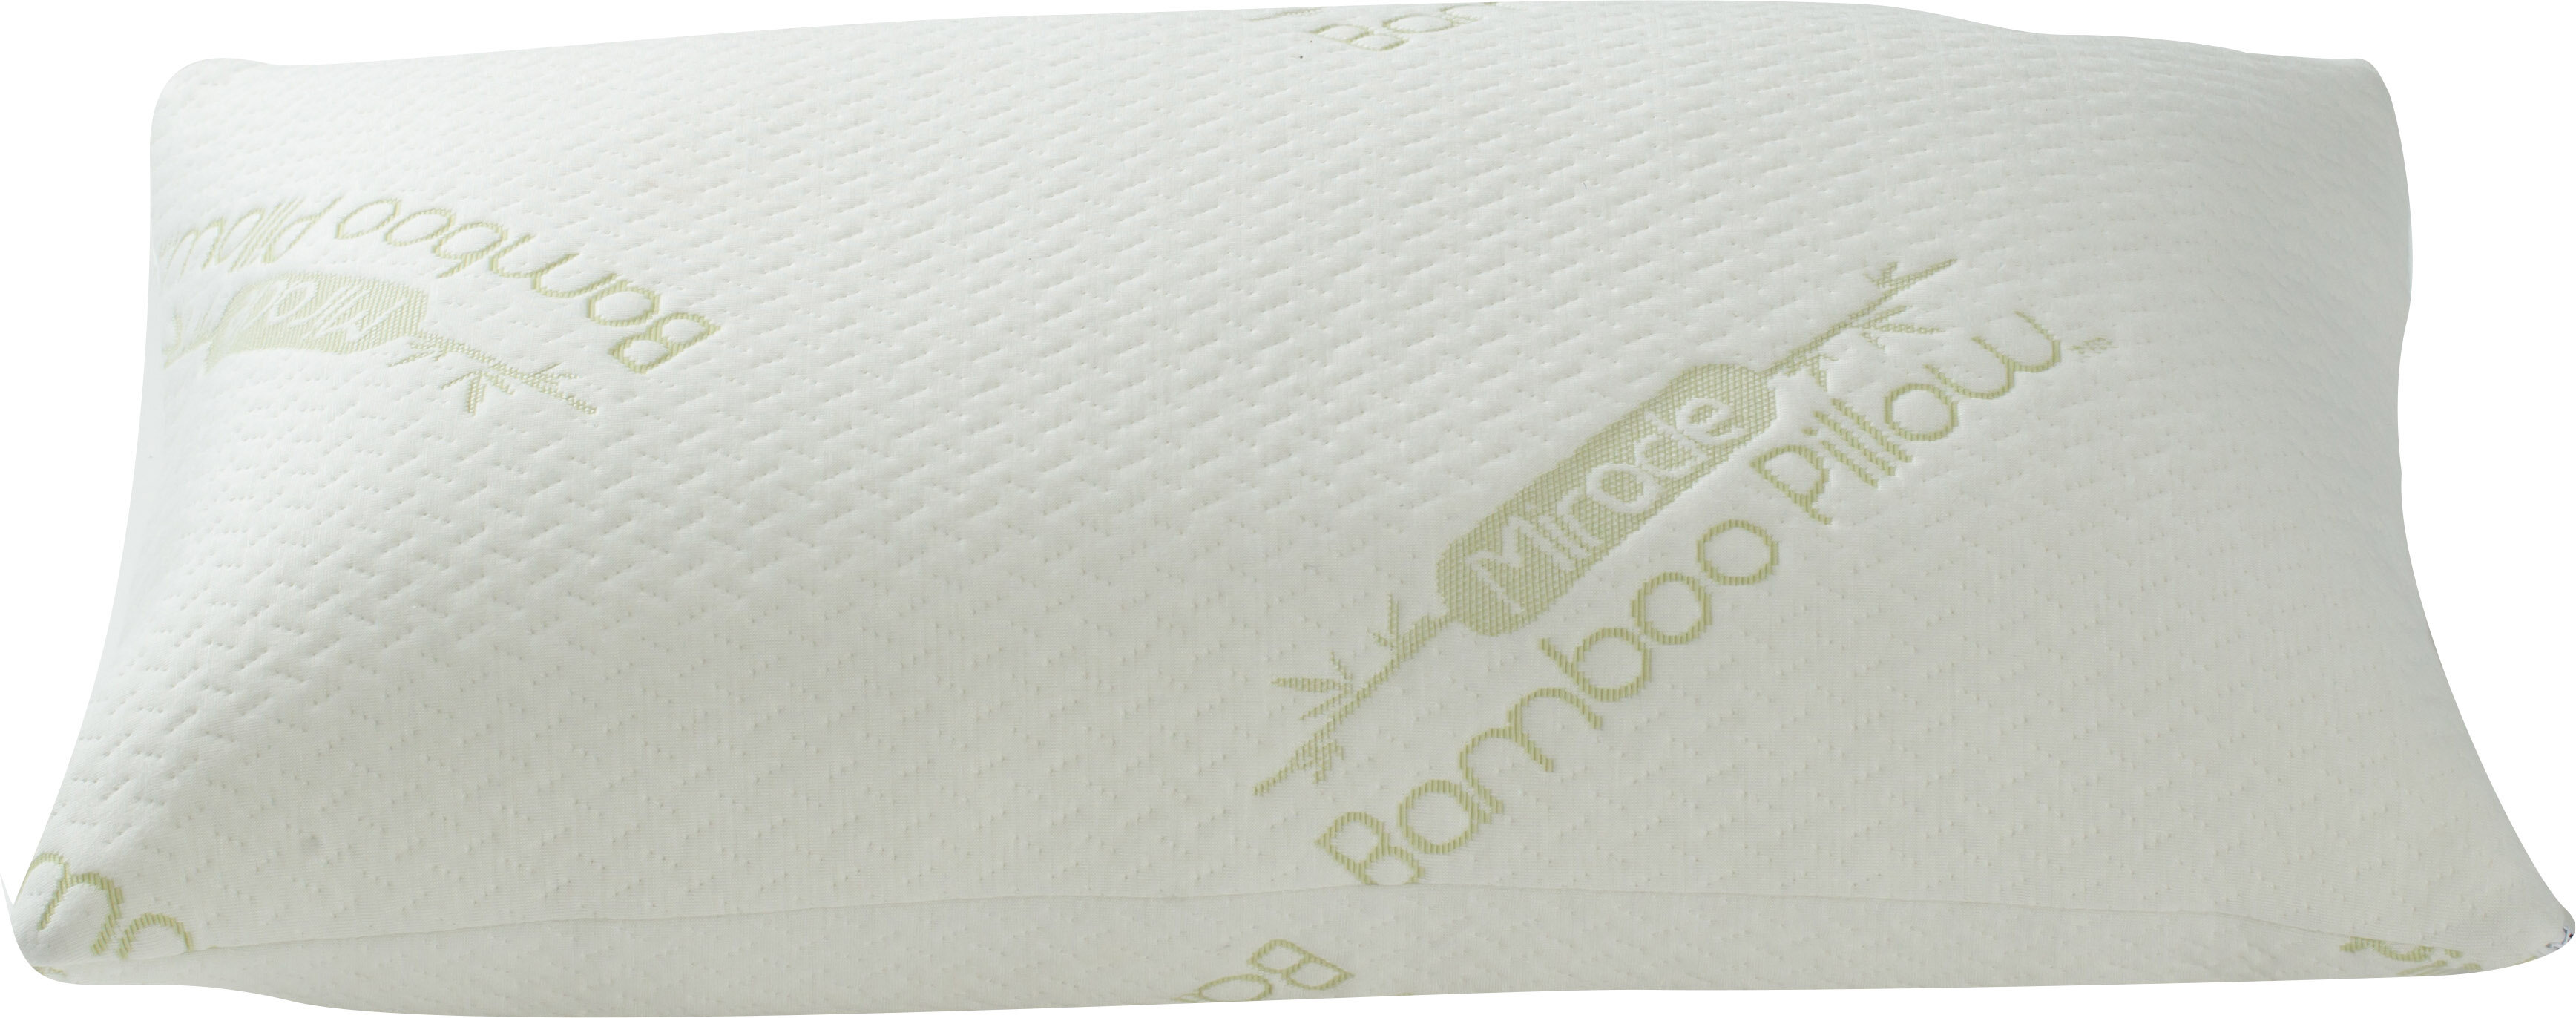 Miracle Bamboo Queen Pillow